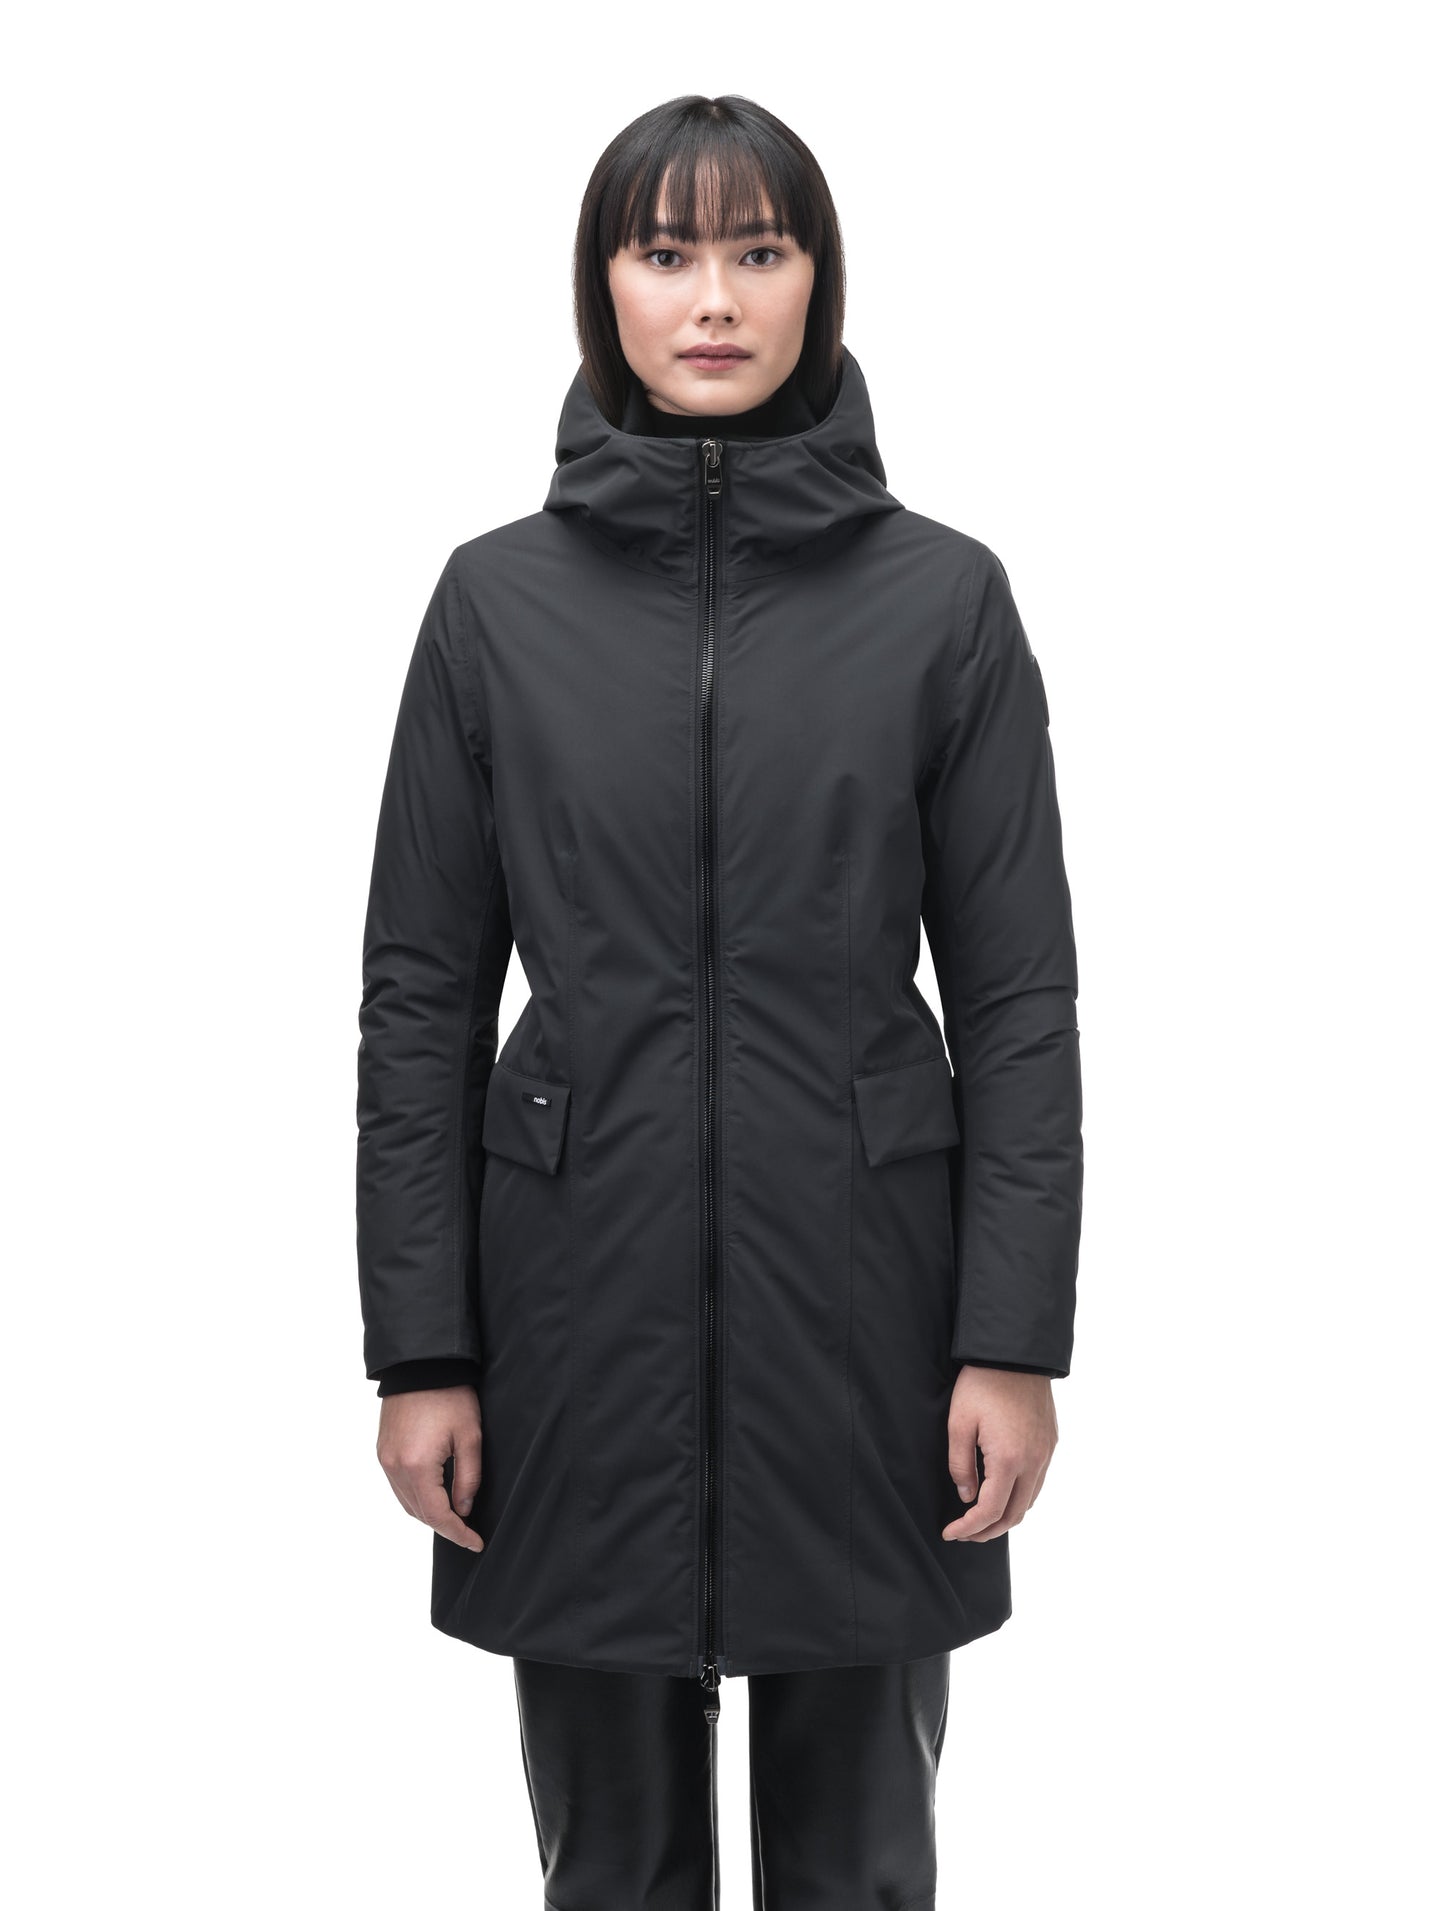 Romeda Furless Ladies Mid Thigh Parka in thigh length, Canadian duck down insulation, non-removable hood, and two-way front zipper, in Black